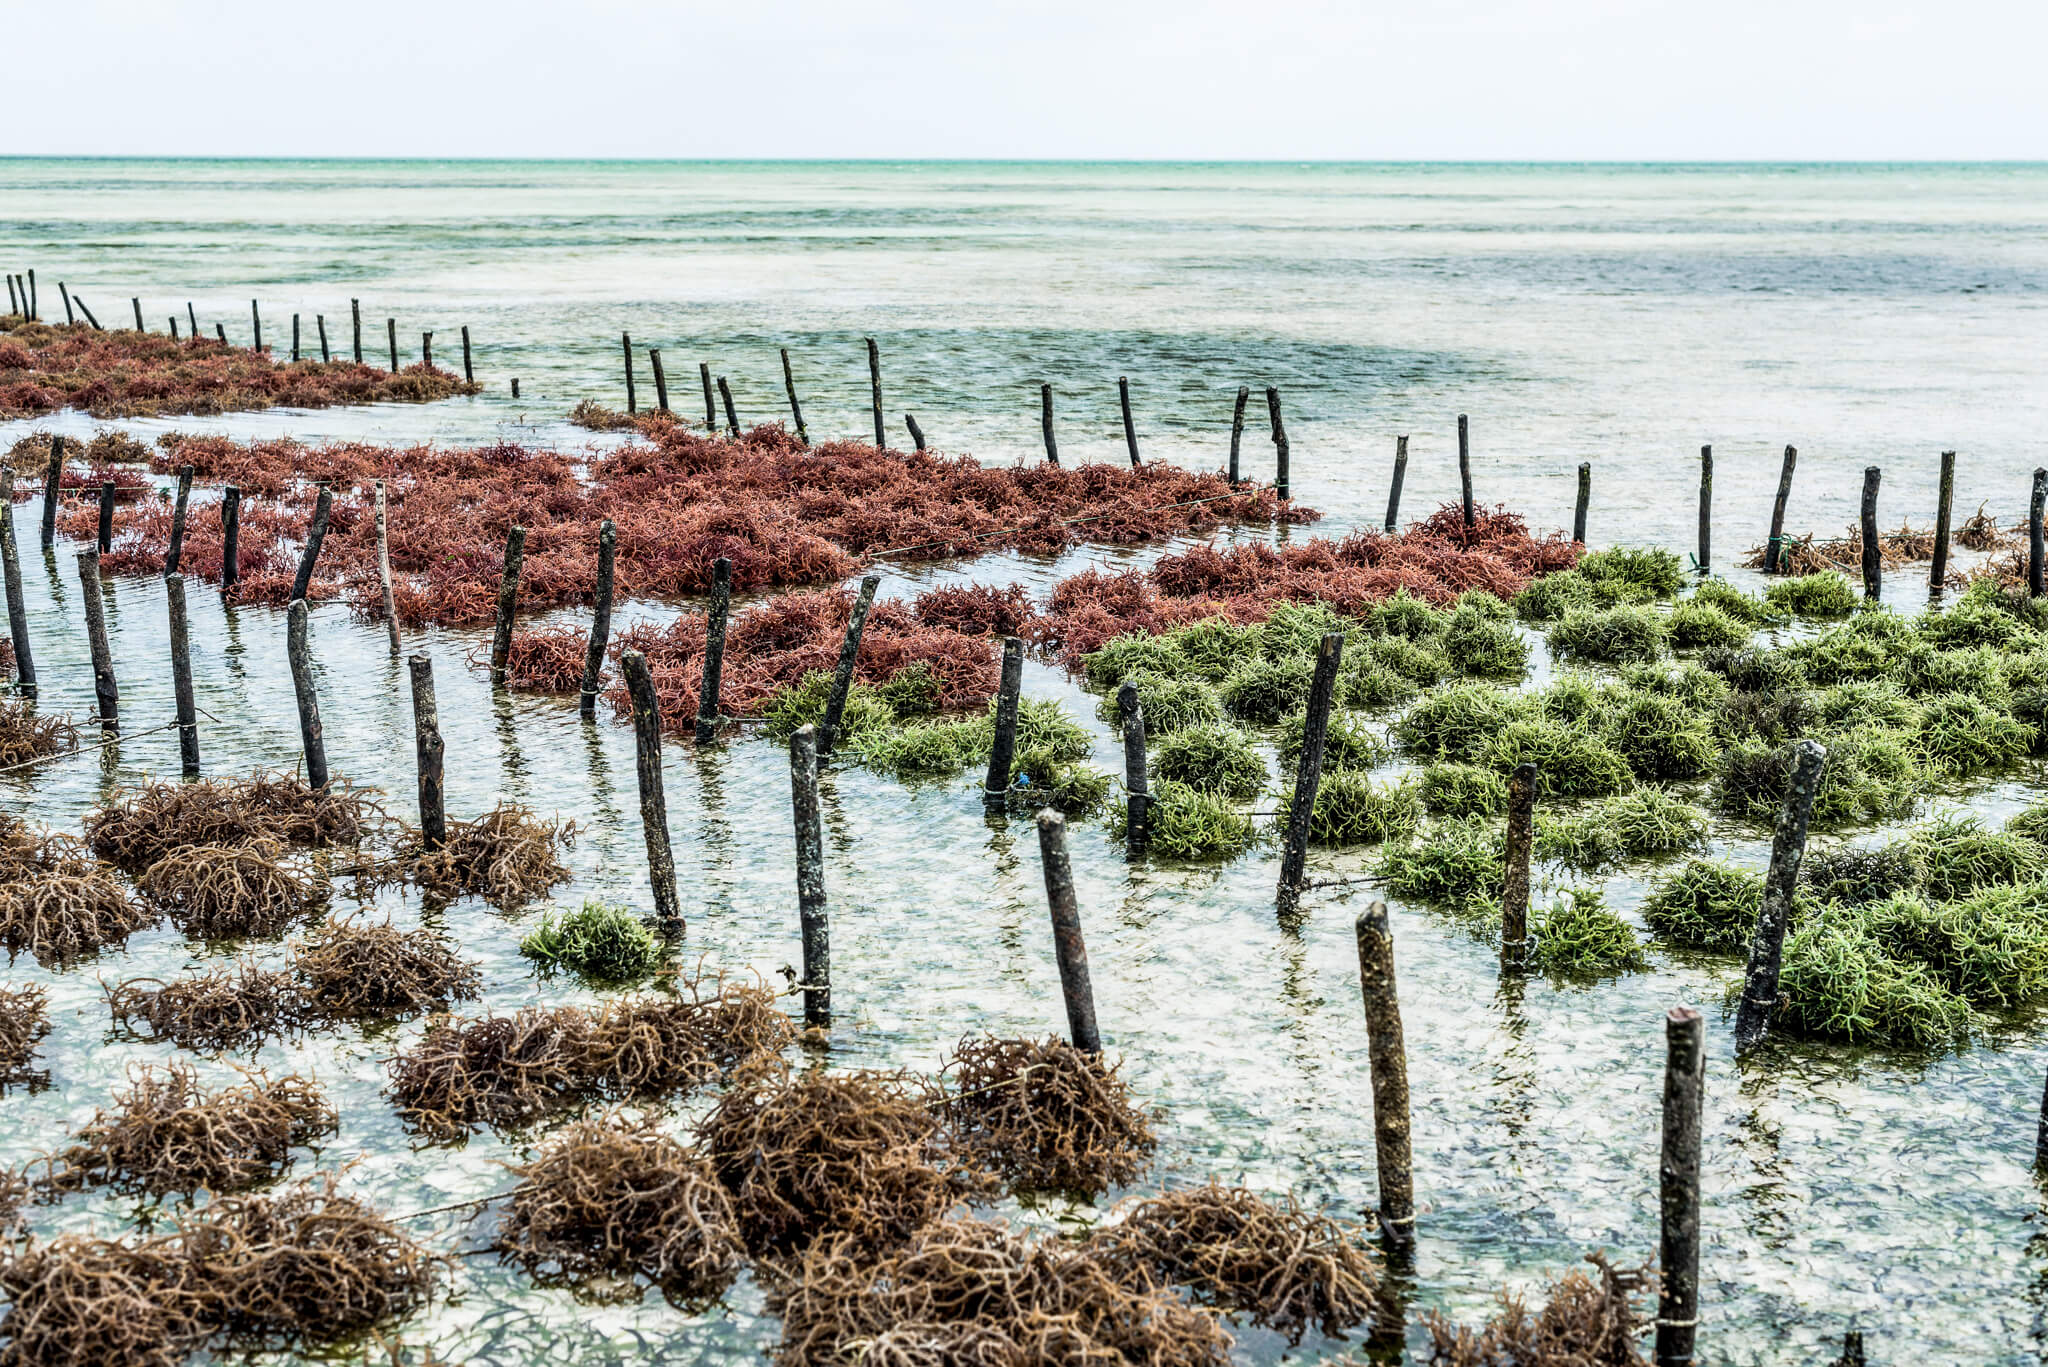 This is how the superfood Seaweed is cultivated on the coast 